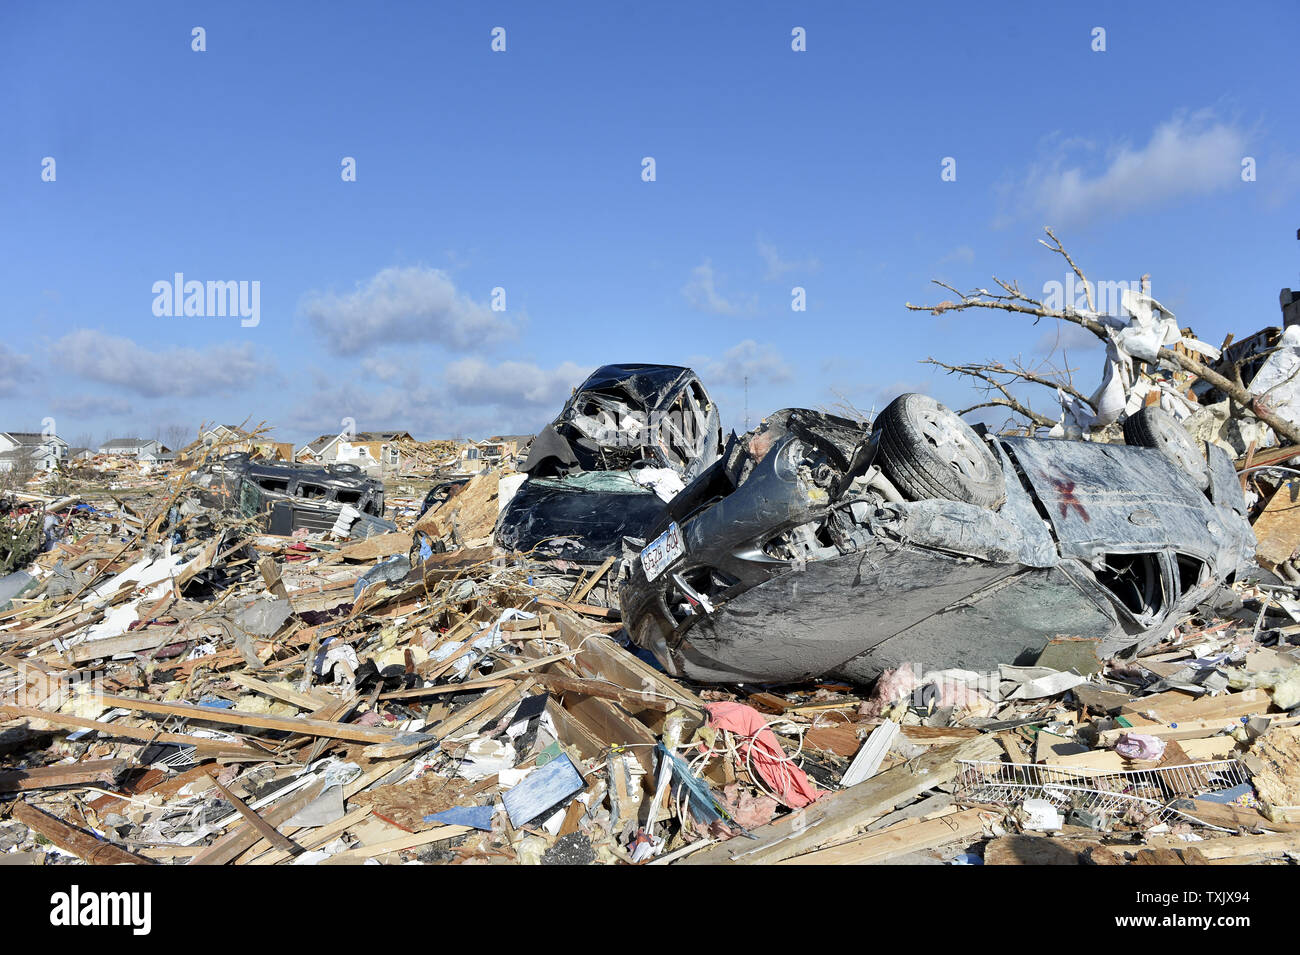 Cars rest where they were thrown by a tornado in Washington, Illinois on November 18, 2013. Six people died and hundreds of homes were destroyed in Illinois as 81 tornadoes were sighted on November 17 throughout 12 midwest states including the EF4 tornado that struck Washington, Illinois.     UPI/Brian Kersey.     UPI/Brian Kersey Stock Photo